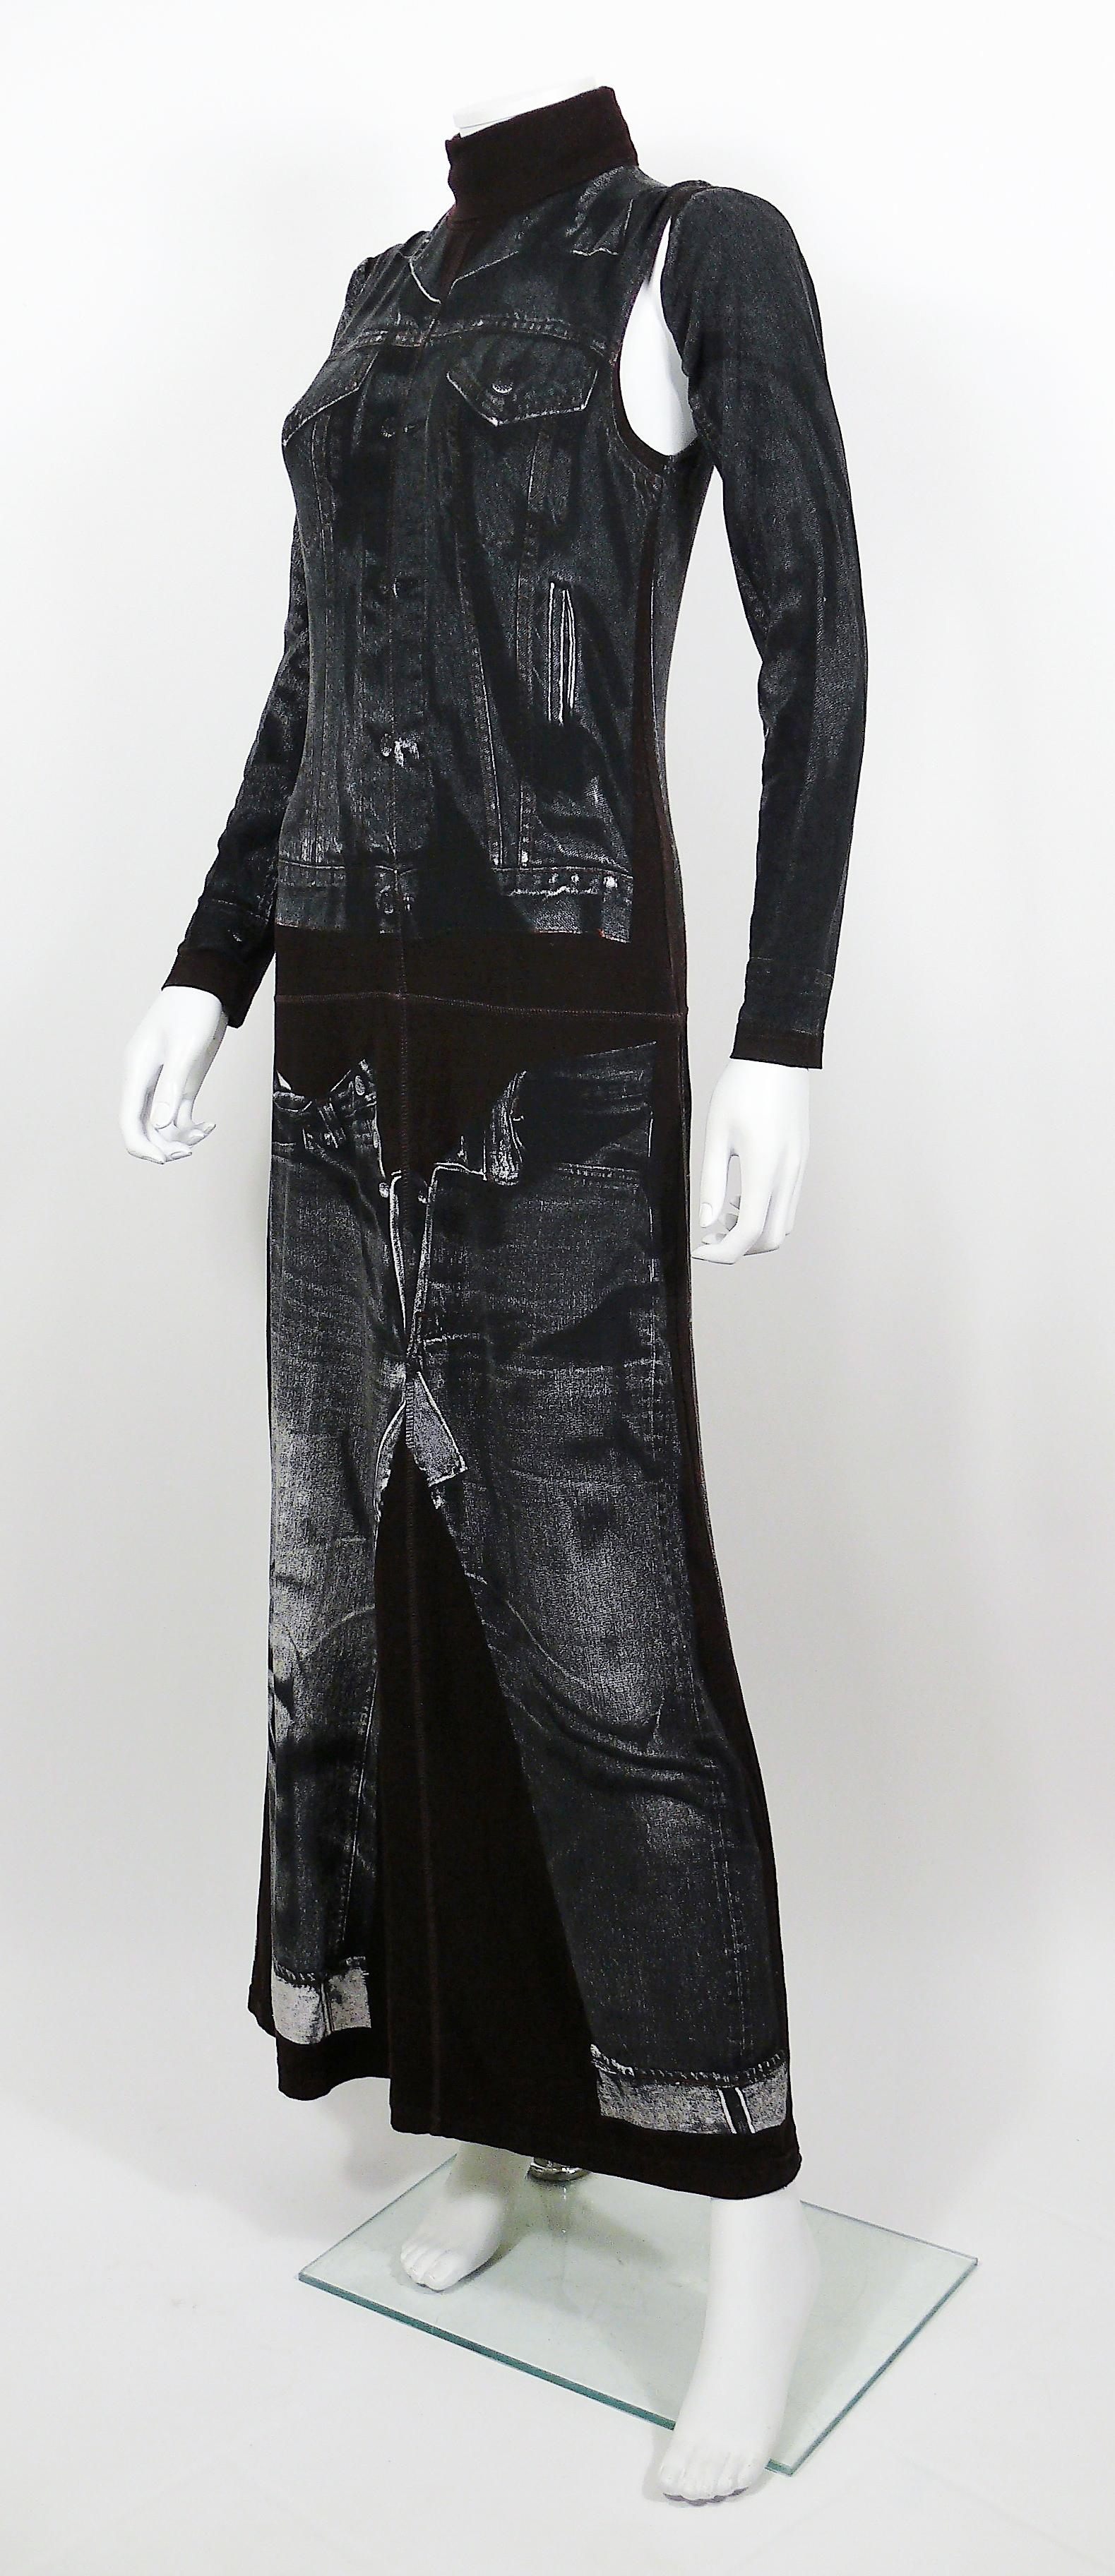 Jean Paul Gaultier Trompe L'oeil Maxi Dress with Detachable Sleeves im Zustand „Gut“ in Nice, FR